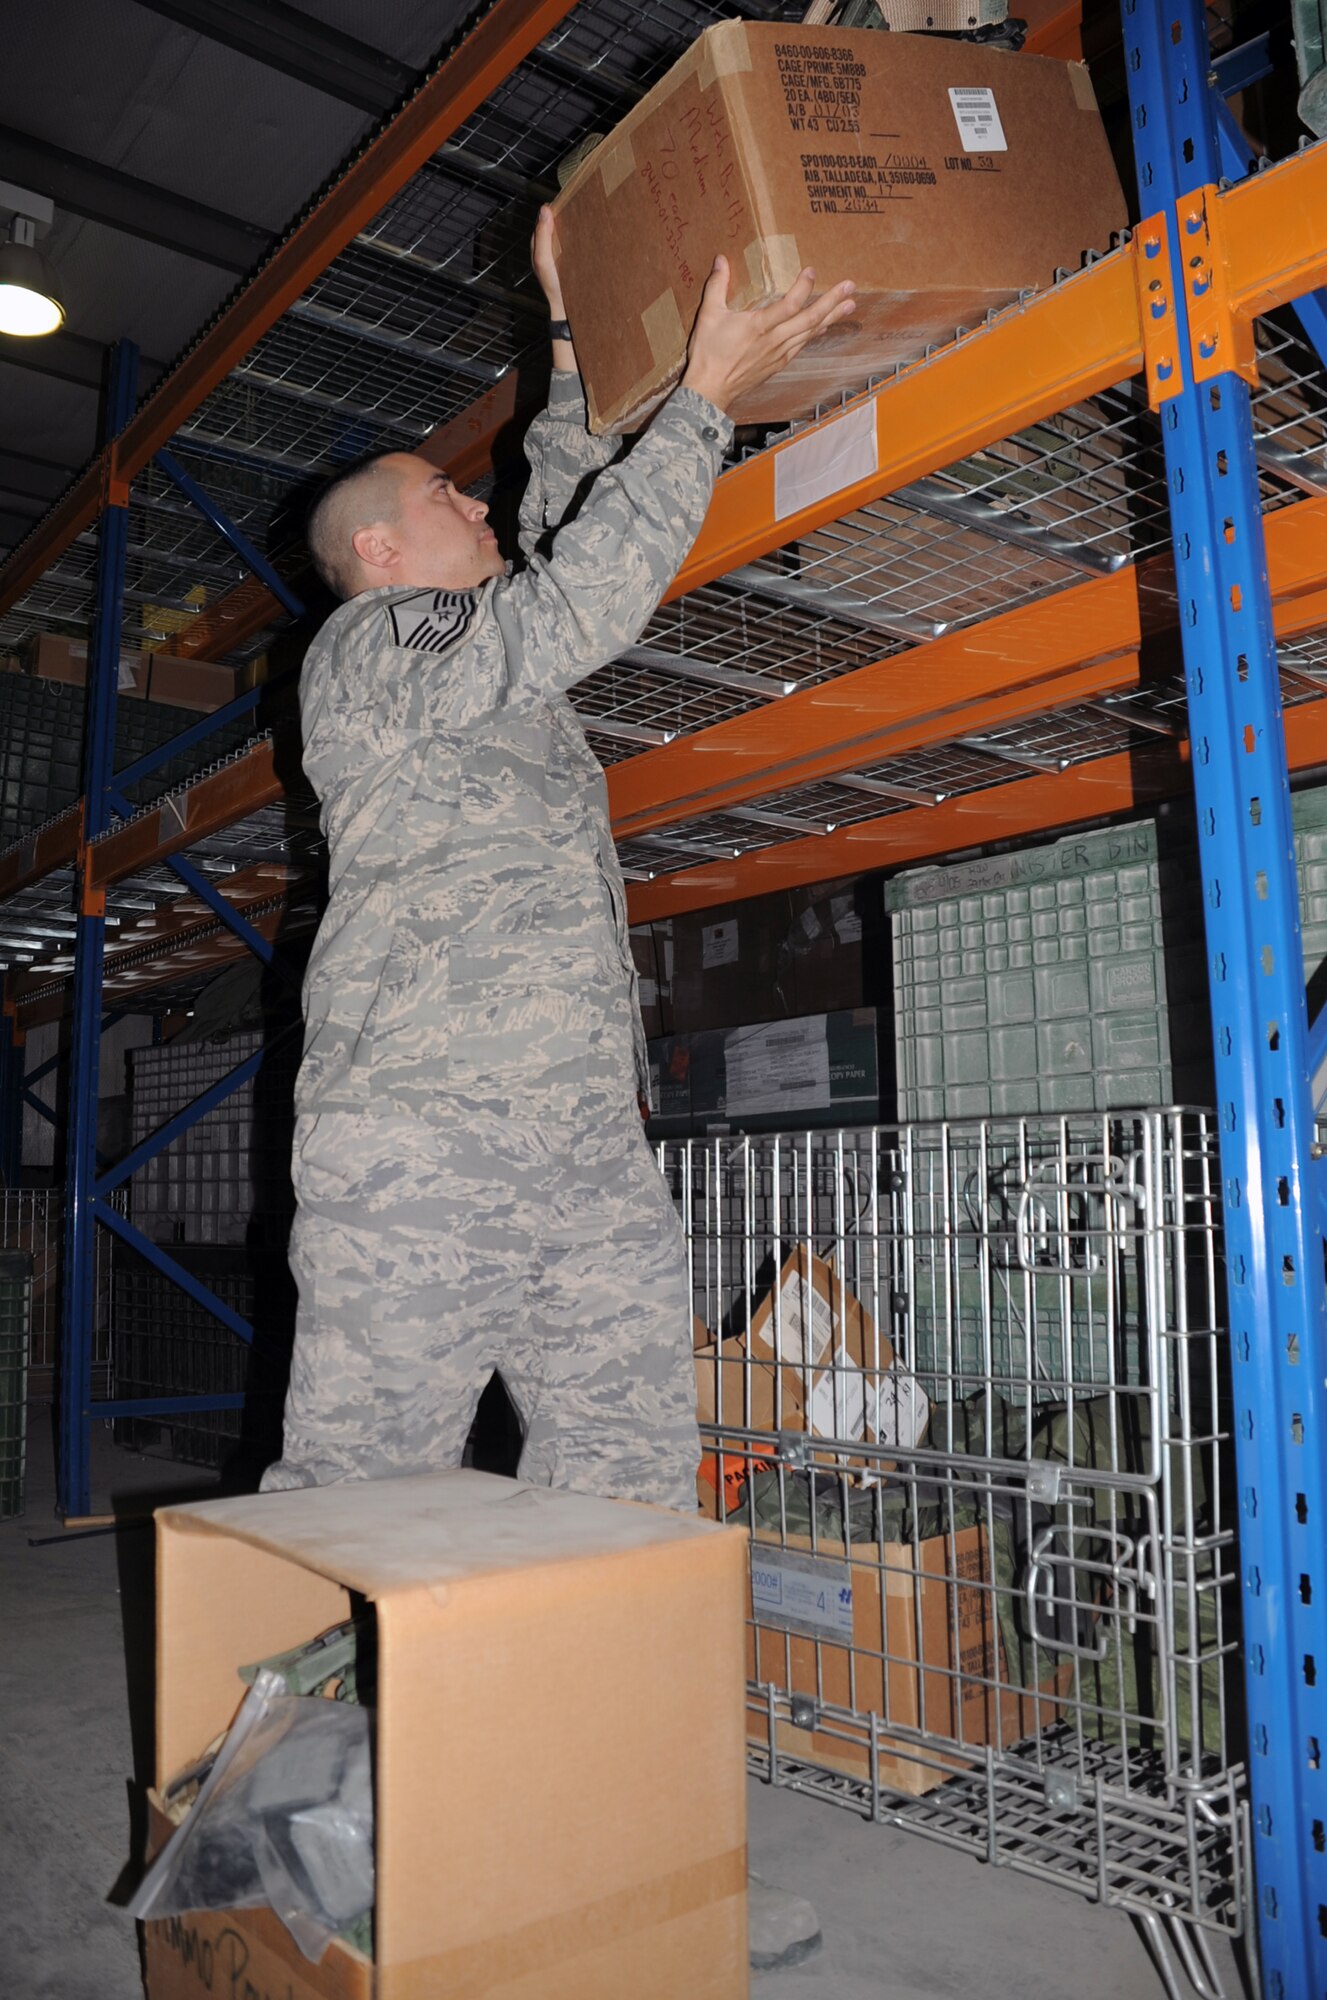 Master Sgt. Alex Brown moves boxes in the supply warehouse for the 380th Expeditionary Logistics Readiness Squadron at a non-disclosed base in Southwest Asia on March 6, 2010. Sergeant Brown is the superintendent of the ?Desert Depot,? otherwise known as the base supply store. Brown is a career material management Airman deployed with the 380th ELRS. He is deployed from the 161st Air Refueling Wing at Phoenix Sky Harbor Air National Guard Base, Ariz., and his hometown is Tolleson, Ariz. (U.S. Air Force Photo/Master Sgt. Scott T. Sturkol)